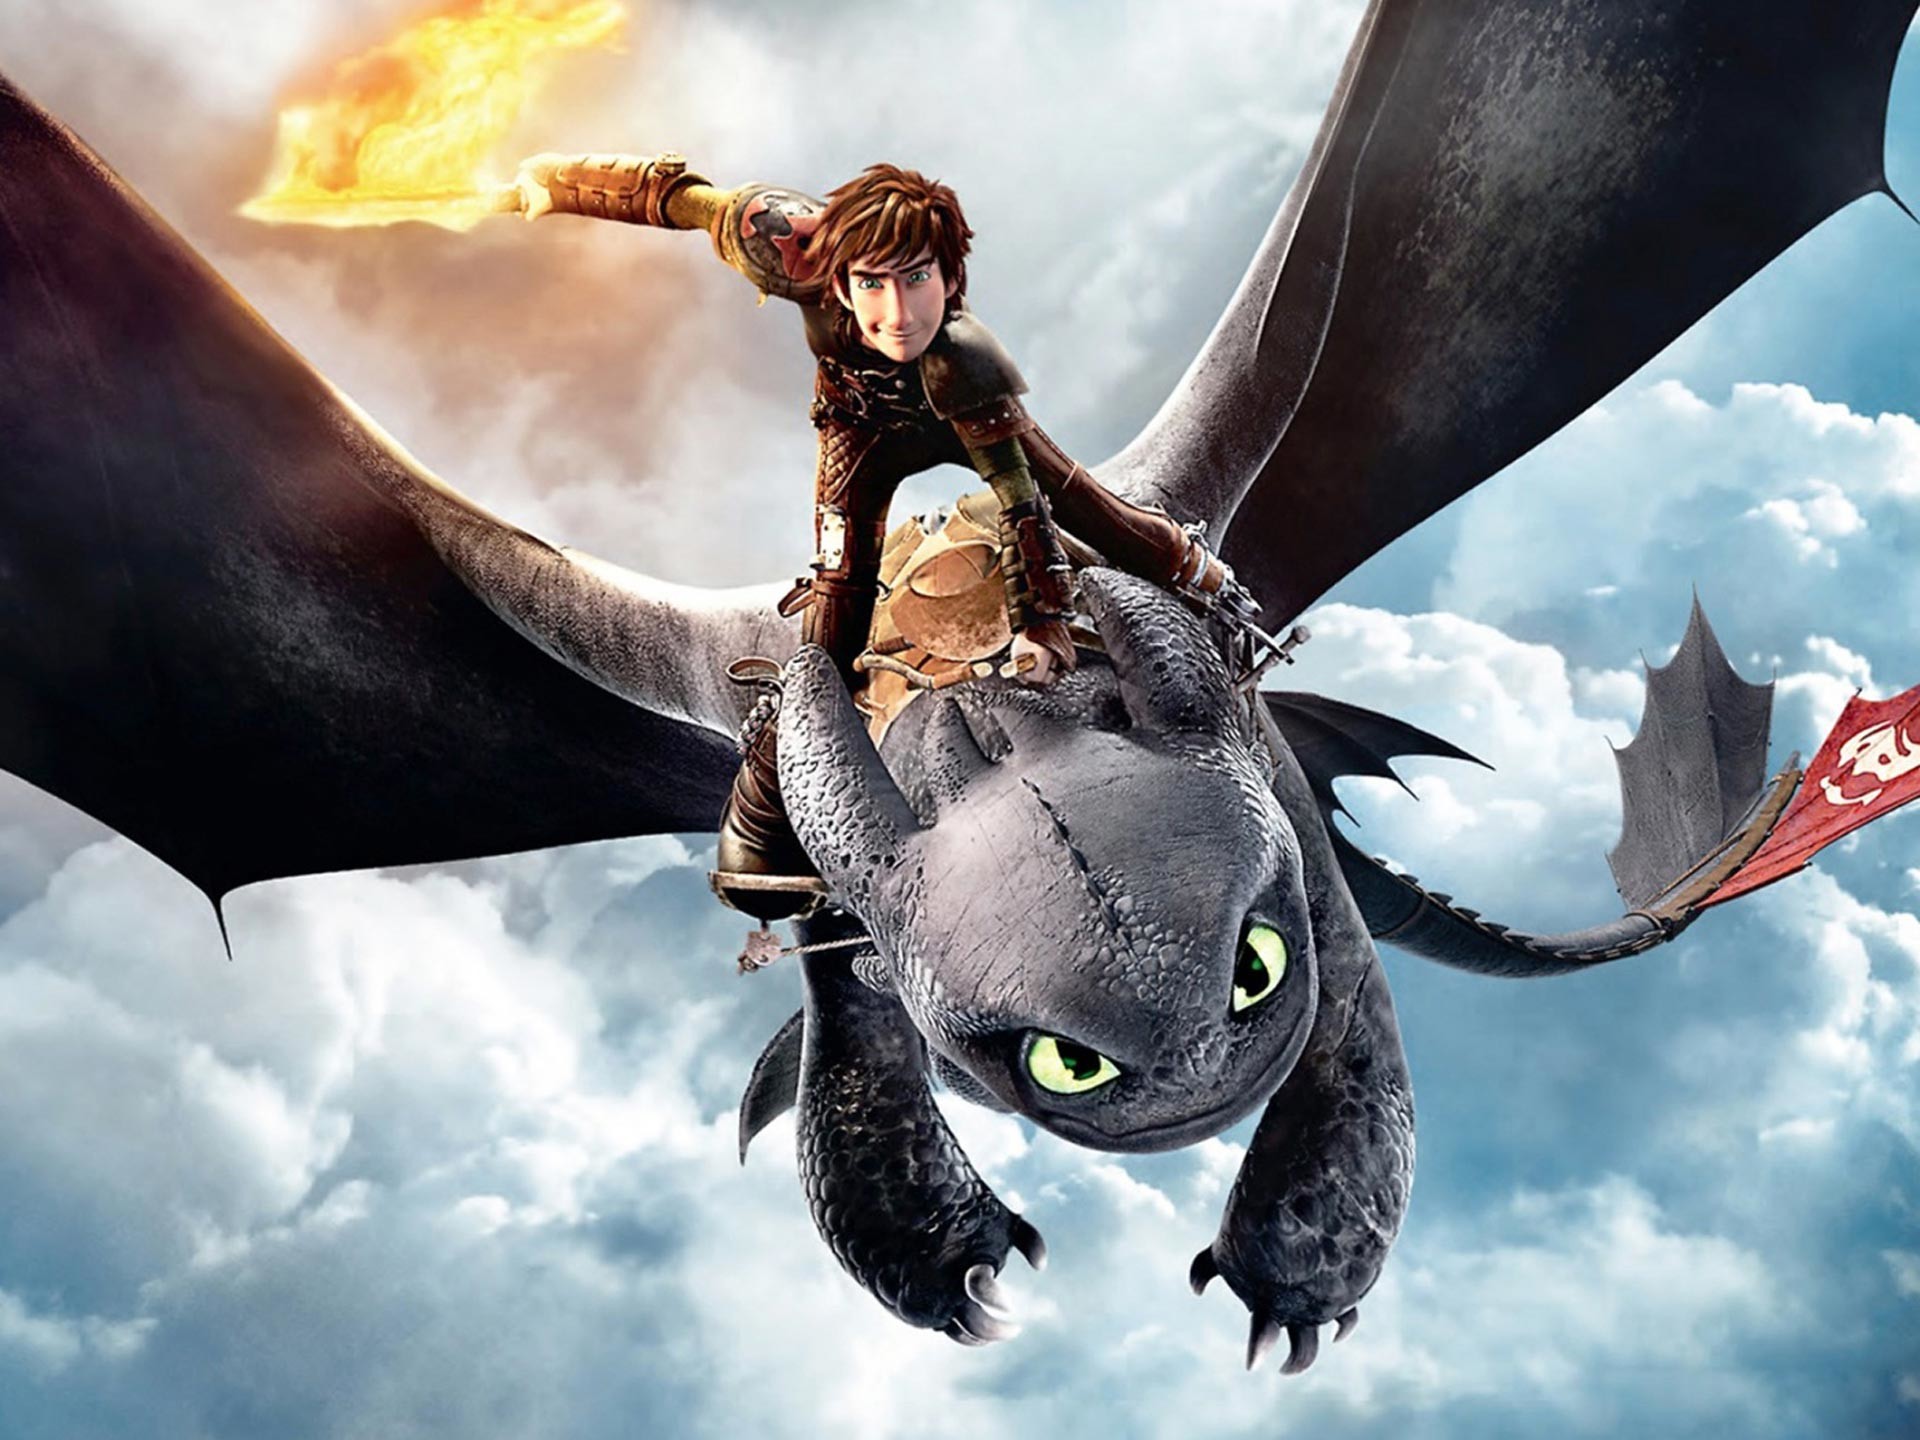 1920x1440 How to Train Your Dragon 2 - Hiccup riding Night Fury  wallpaper